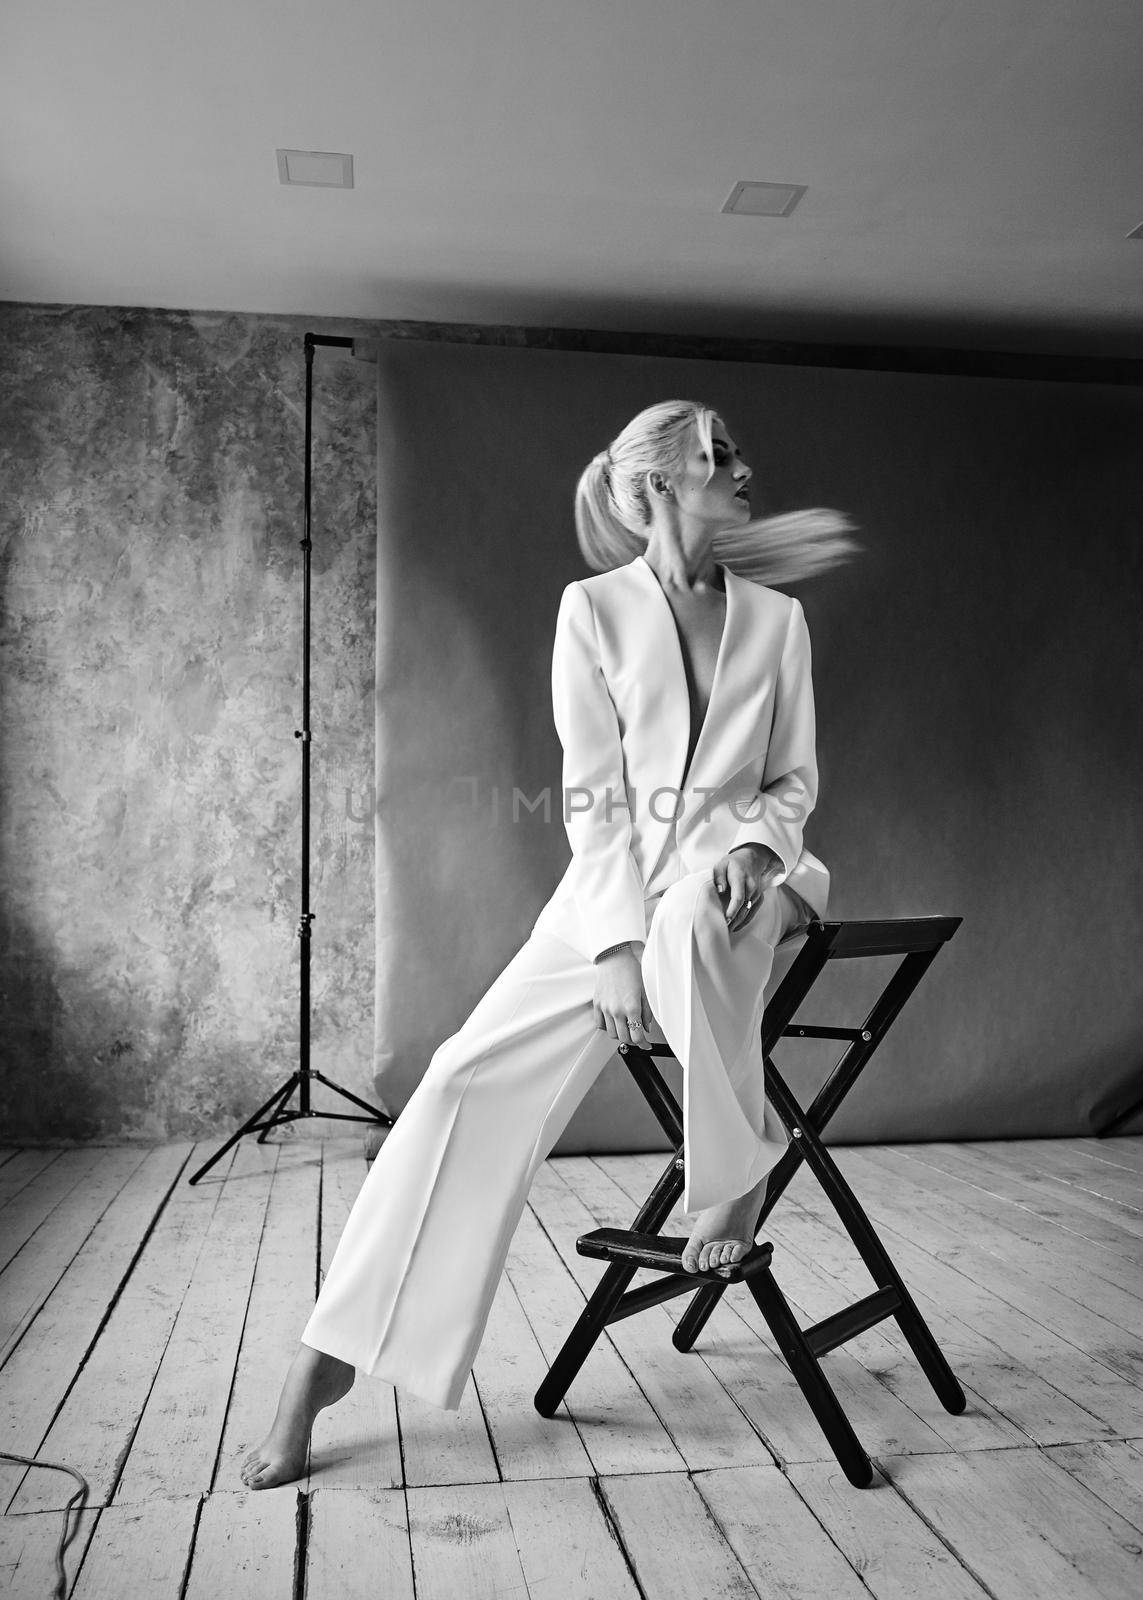 High Fashion blond woman in white suit. Elegant Style model. Dynamic shot in Photo studio shooting. Black and white